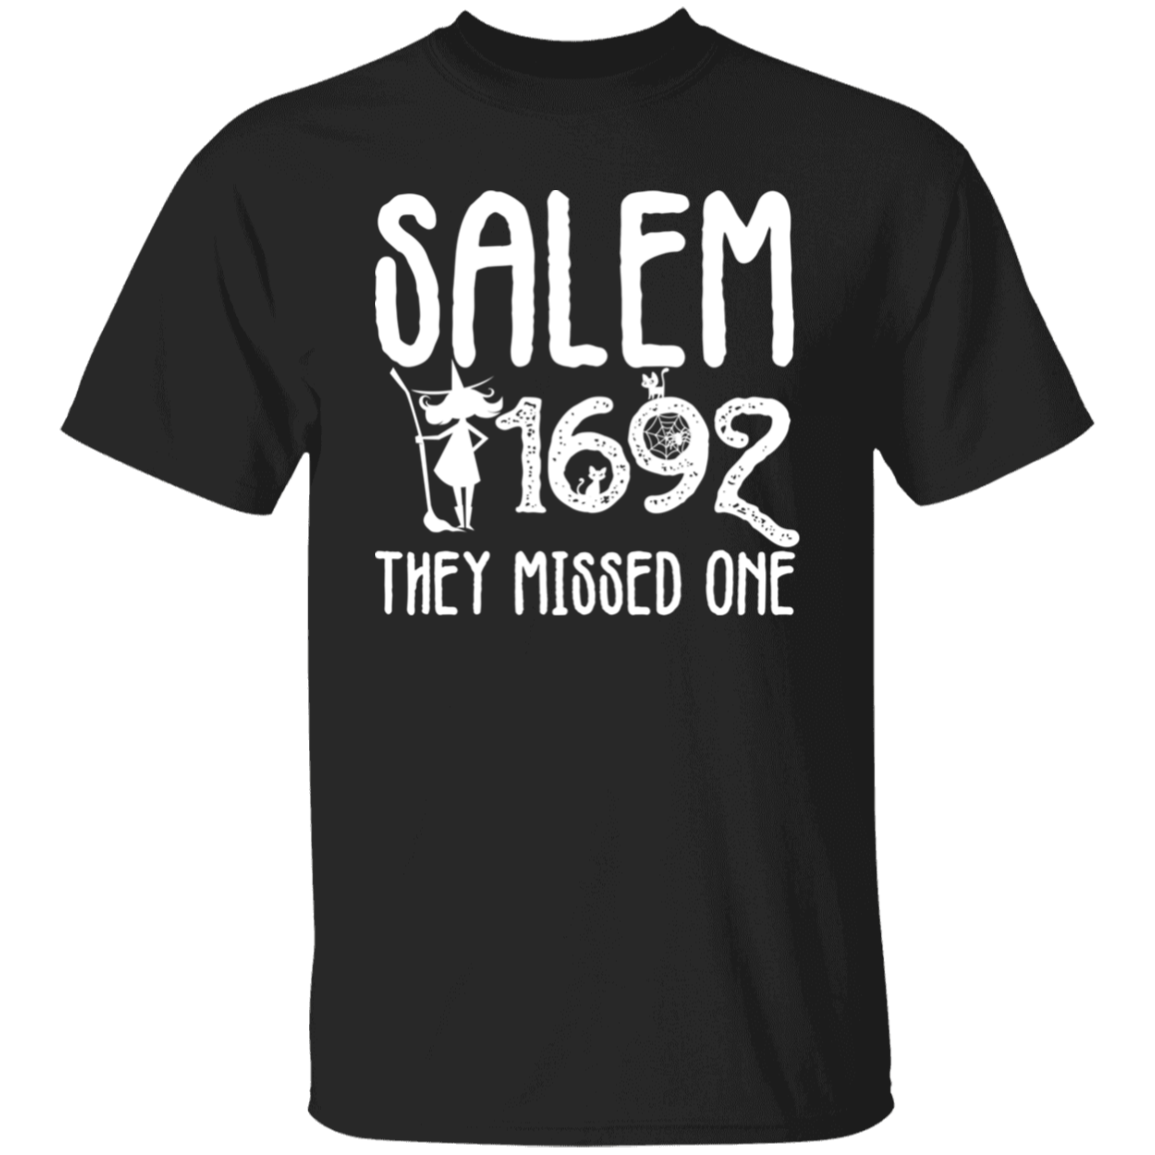 Salem They Missed One 1692 T-Shirt